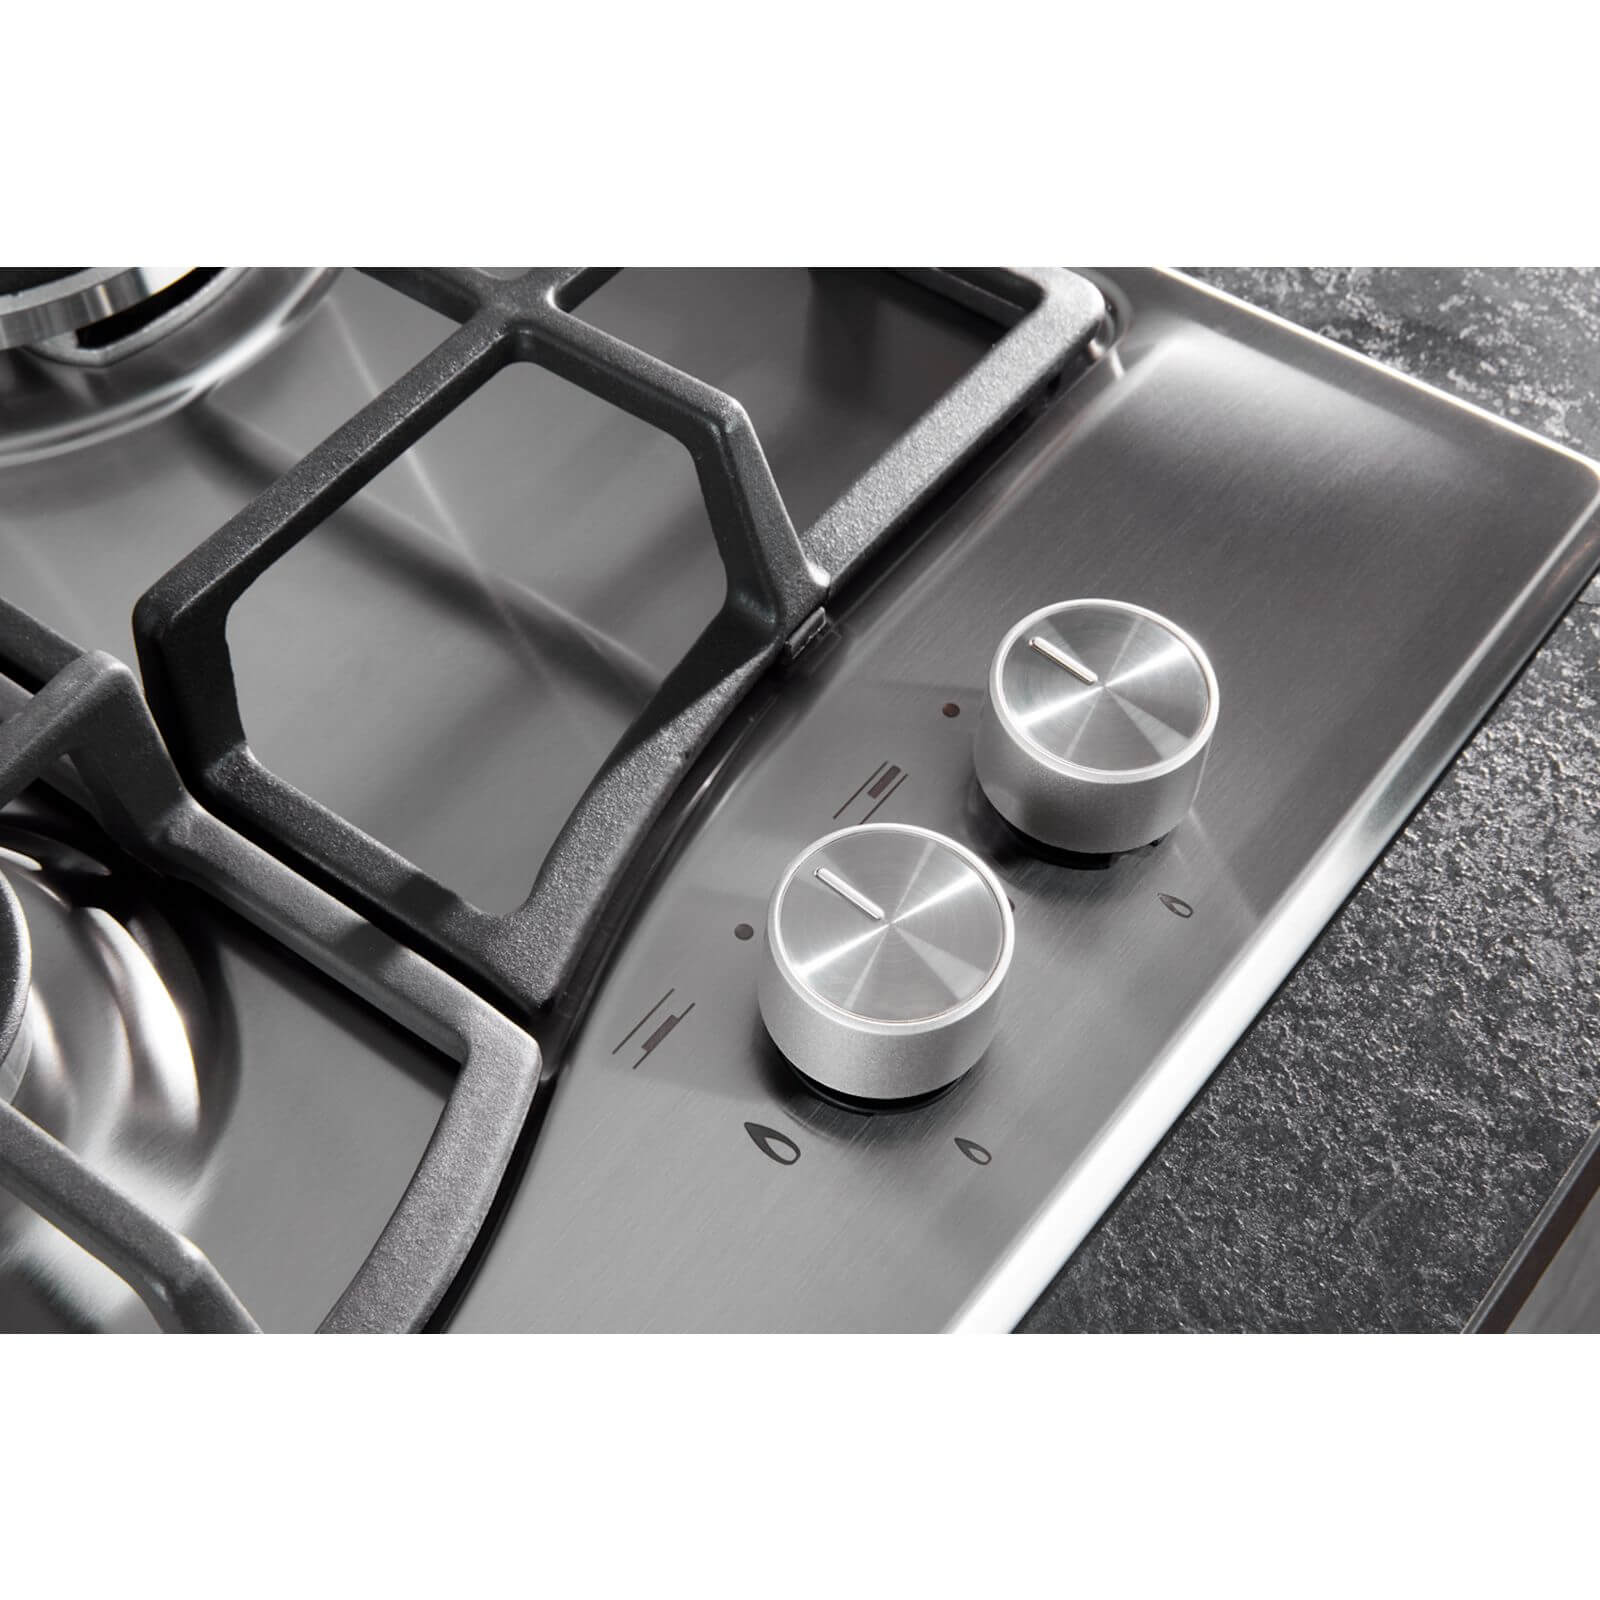 Hotpoint PCN641IXH Gas Hob - 60cm - Stainless Steel